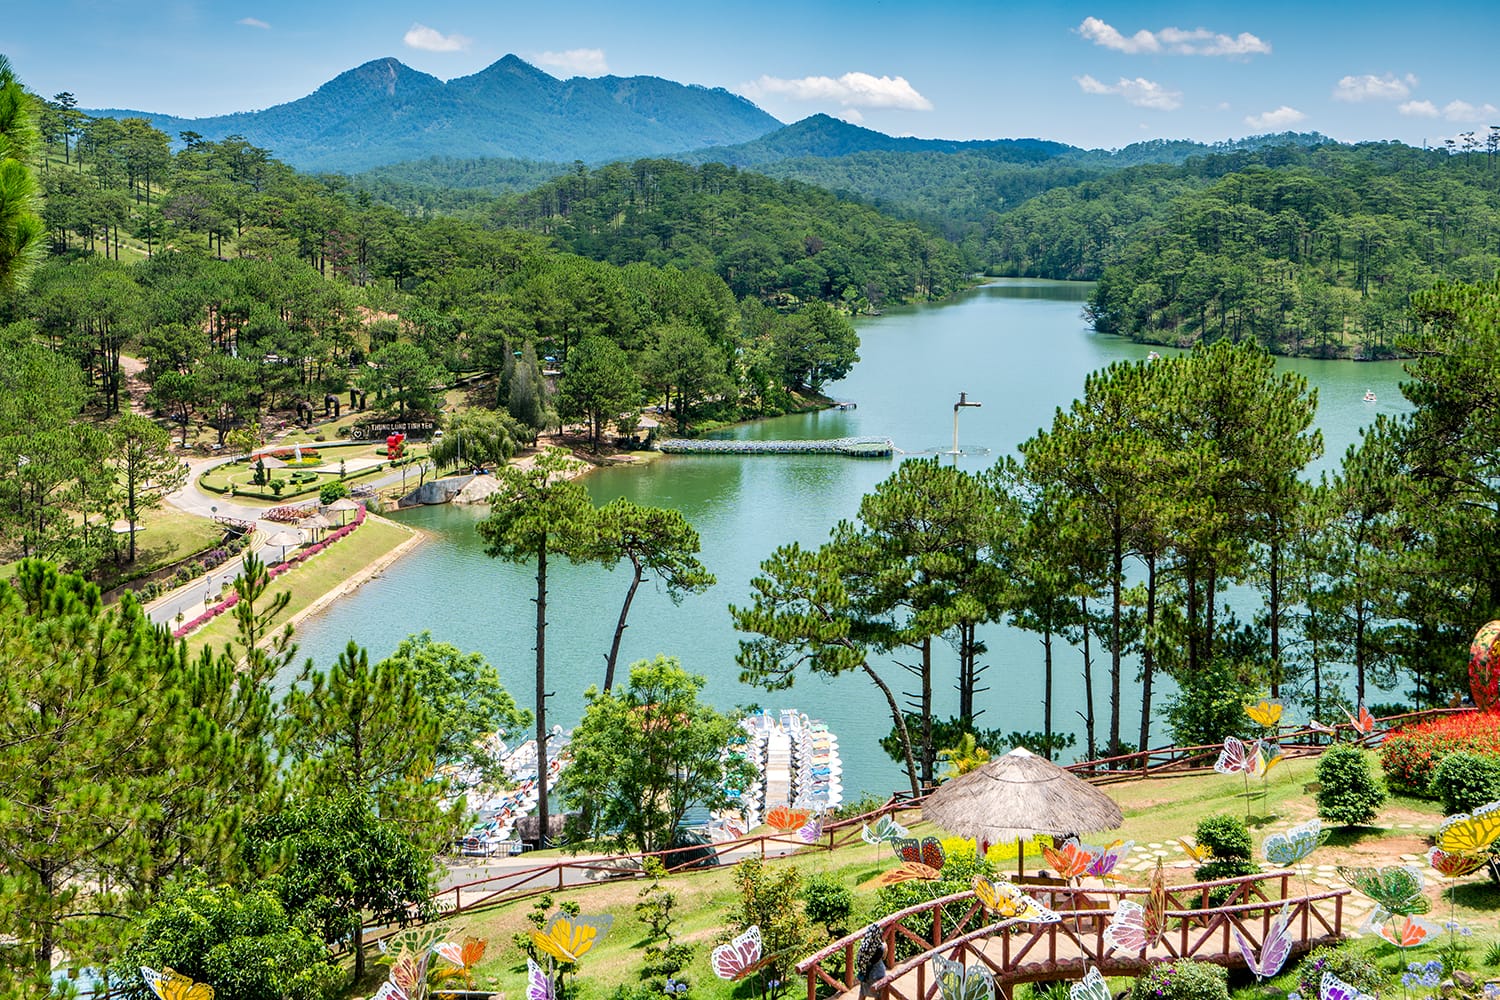 Love valley in Dalat Vietnam is one of the most romantic sites of Dalat city, with many deep valleys and endless pine forests